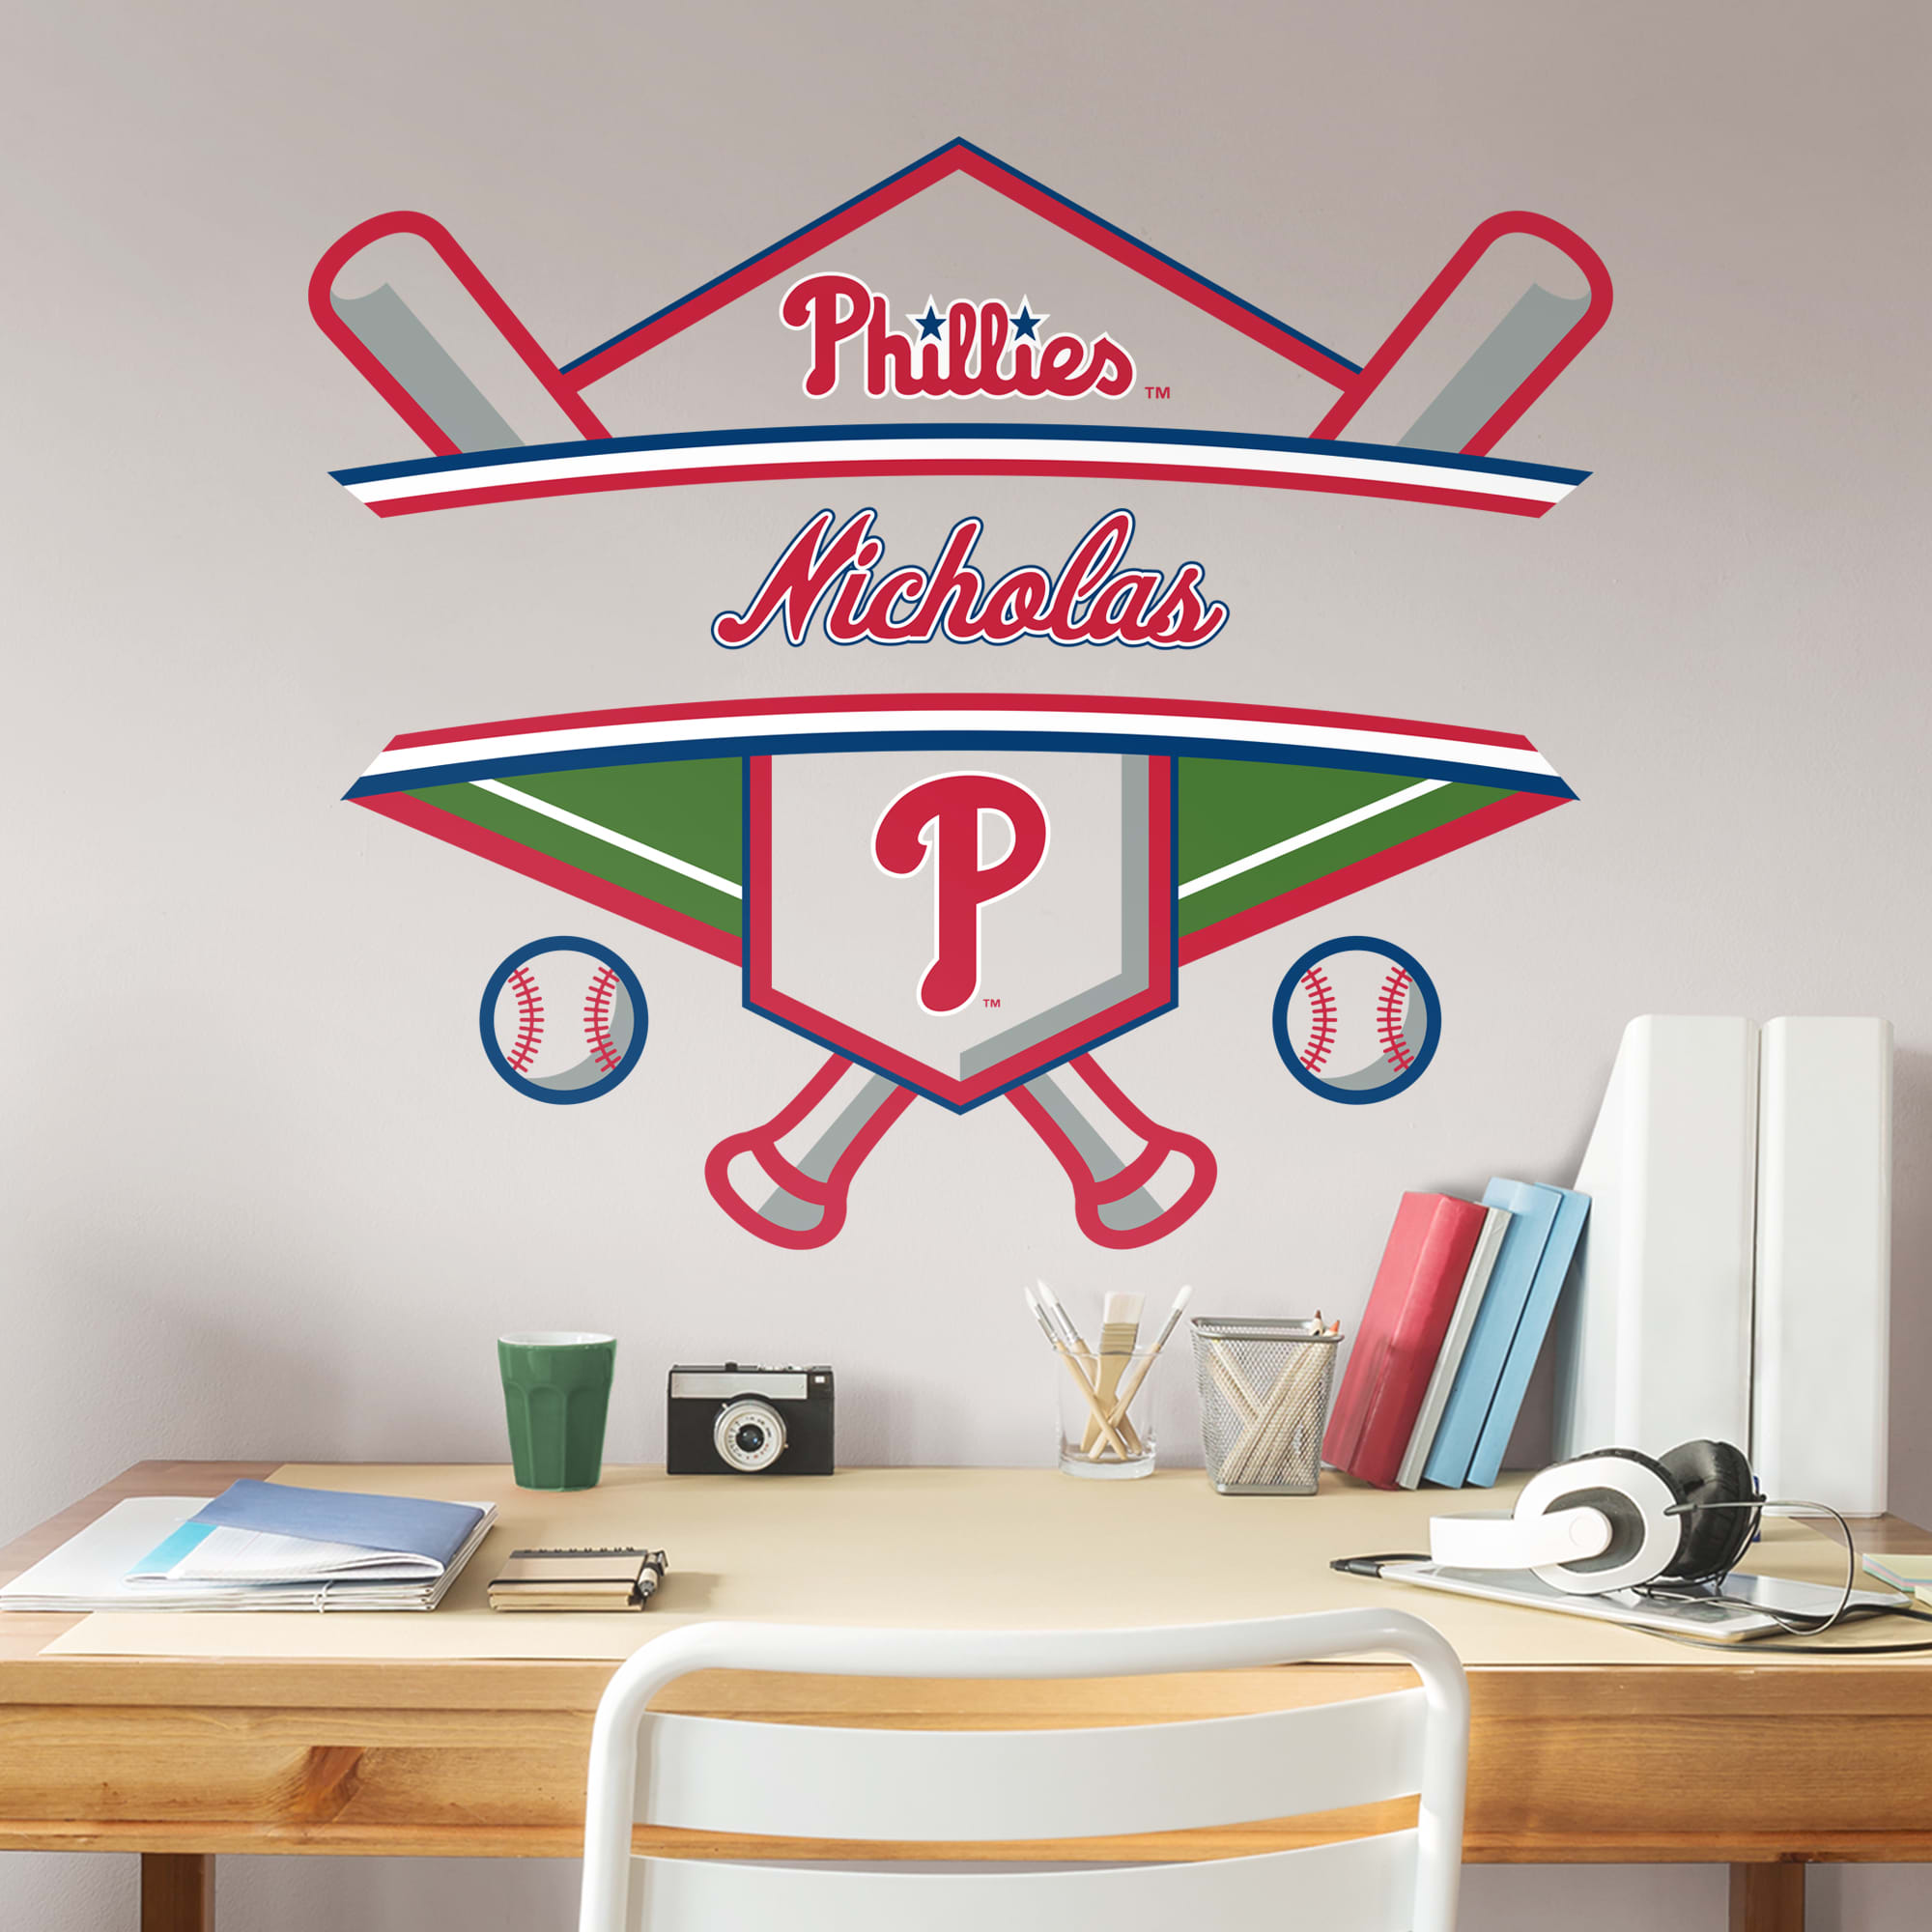 Philadelphia Phillies: Personalized Name - Officially Licensed MLB Transfer Decal 45.0"W x 39.0"H by Fathead | Vinyl